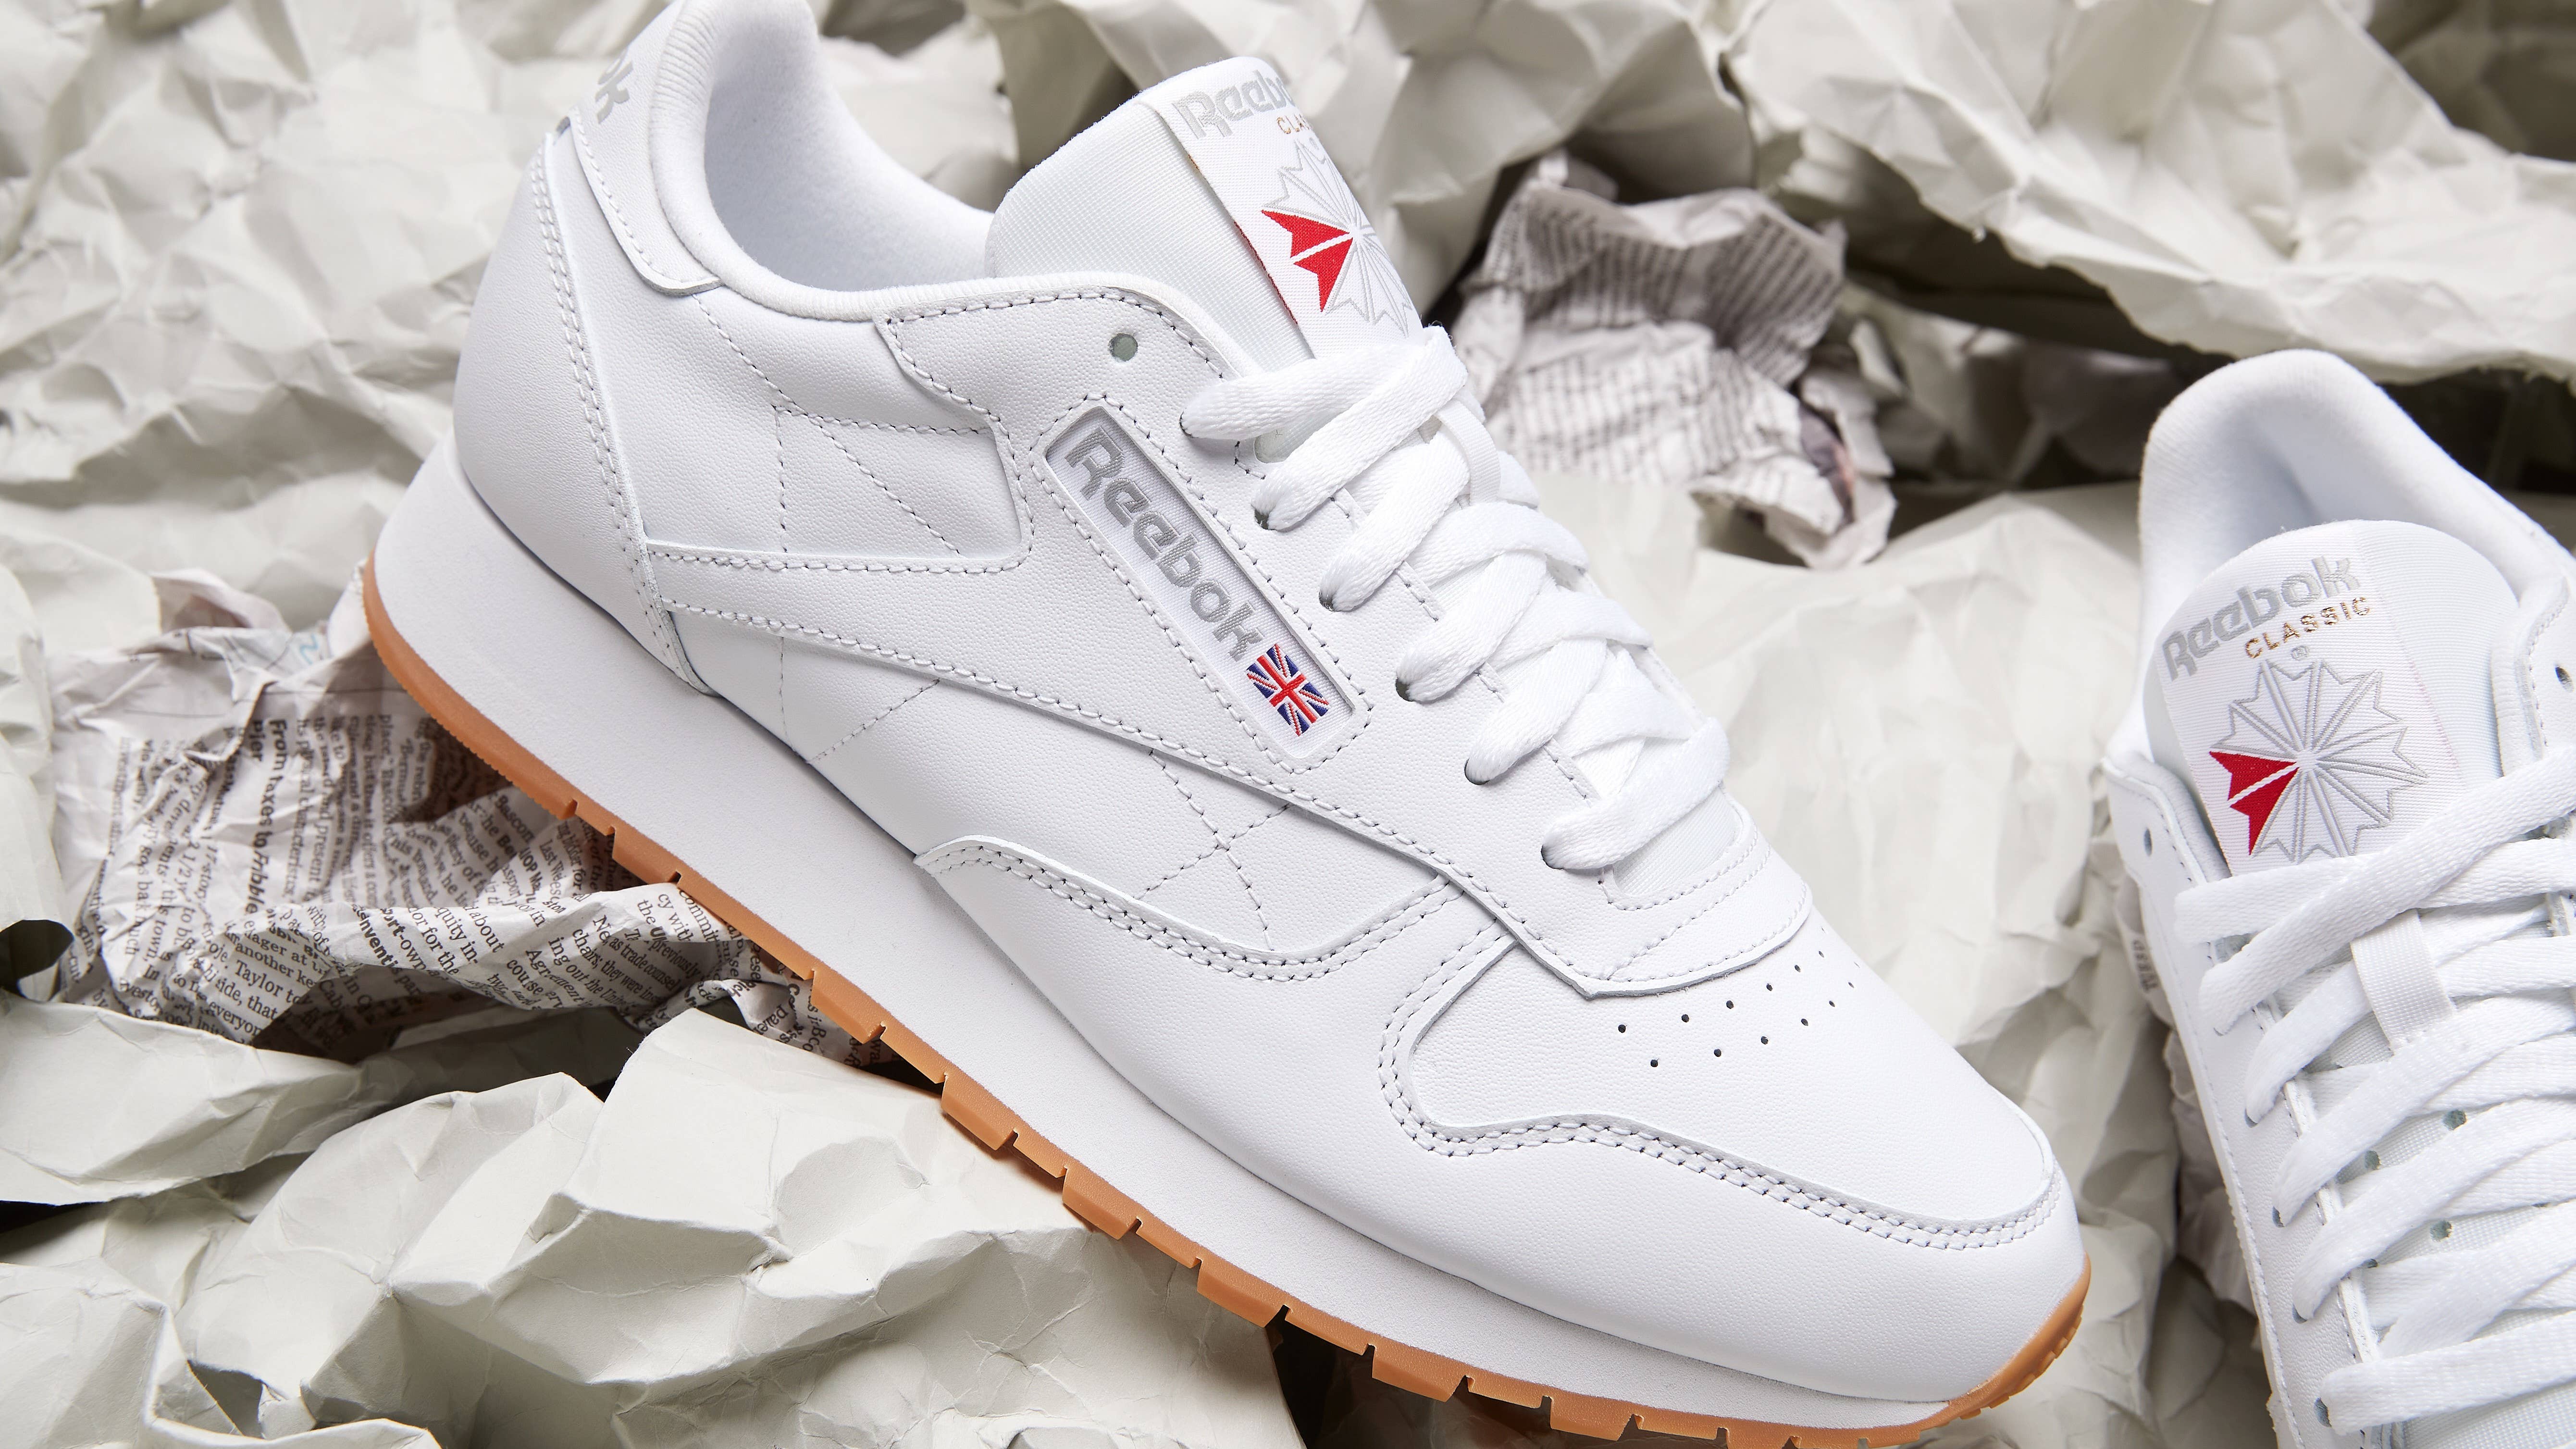 Reebok Classic Leather in white and gum